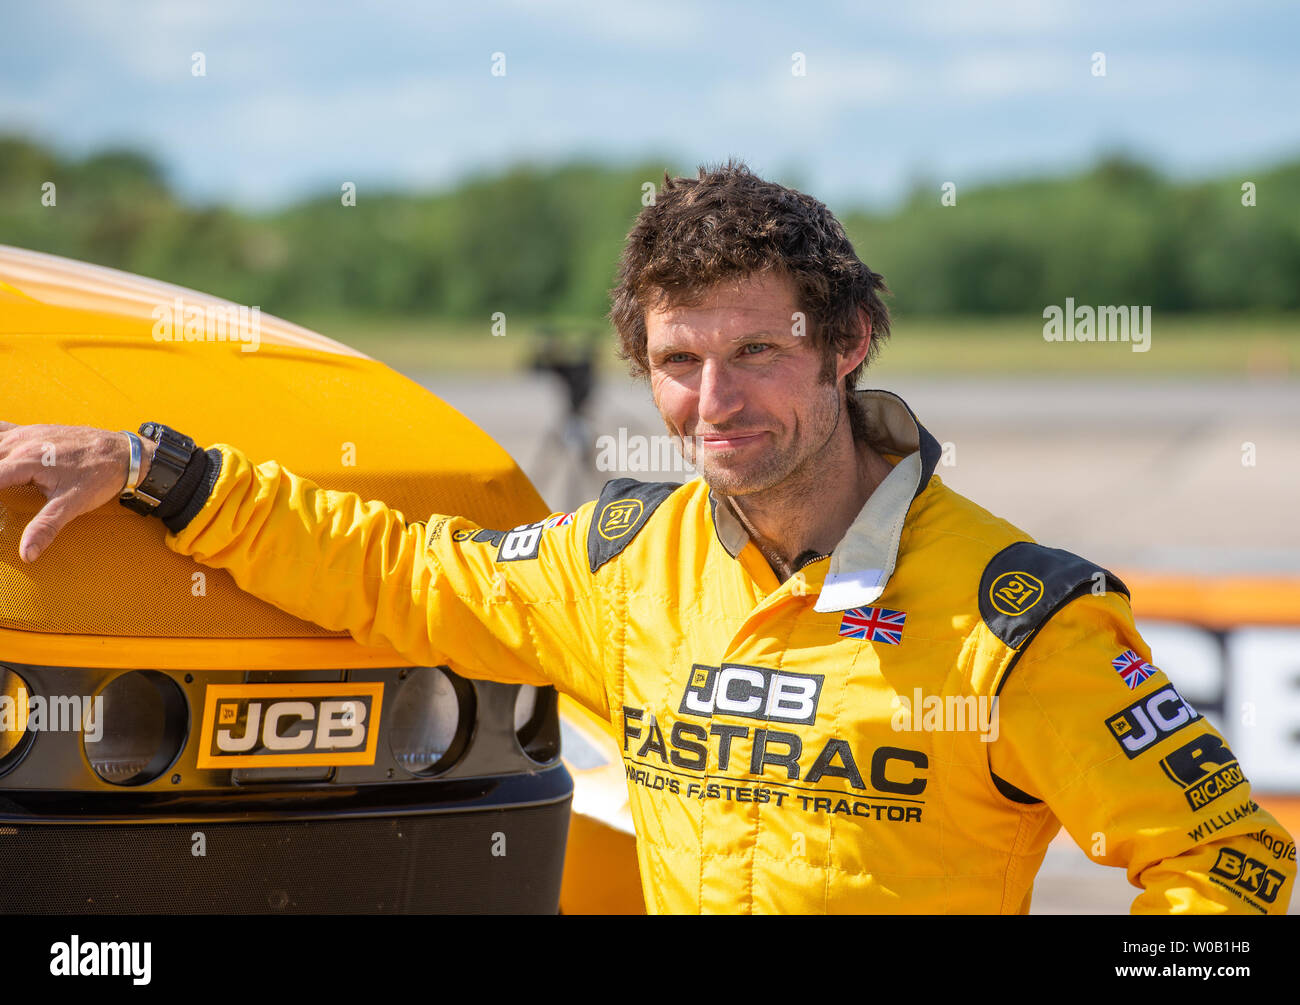 Guy Martin. JCB Agri-machinery manufactures making a new British speed record for a tractor of 103.6 mph, beating the previous 87.27 mph record set in Stock Photo